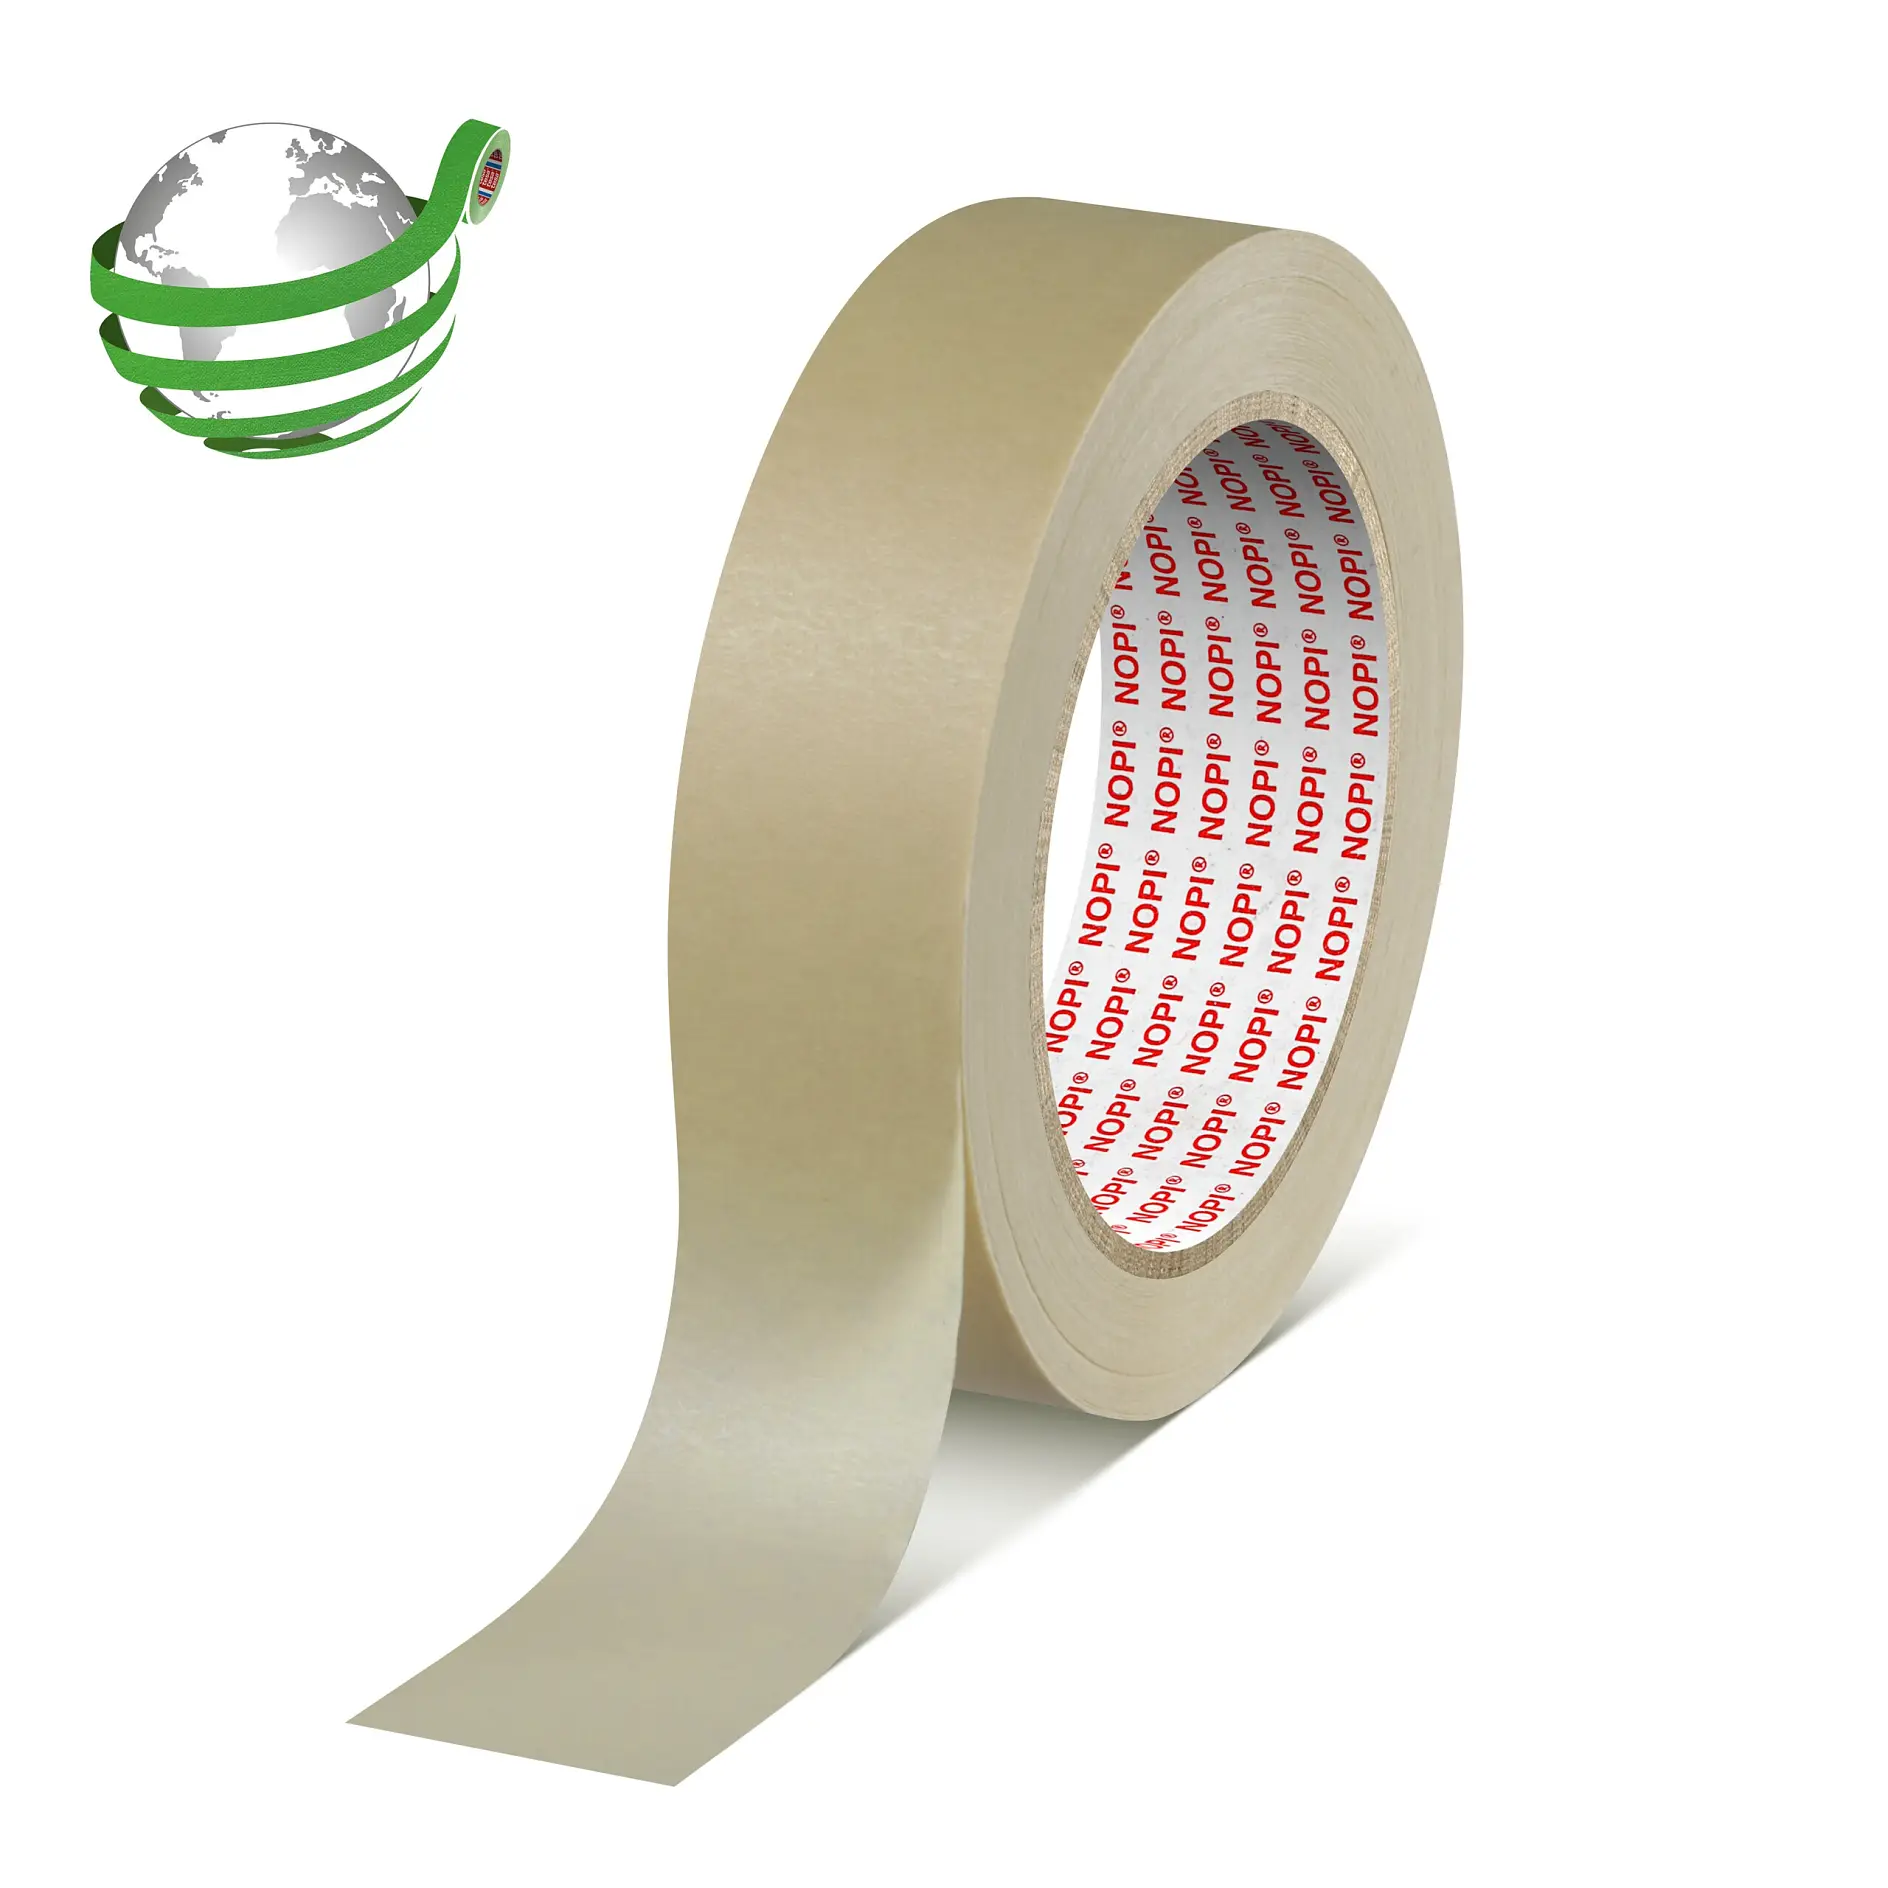 nopi-4349-general-purpose-paper-tape-chamois-043490000200-pr-with-marker